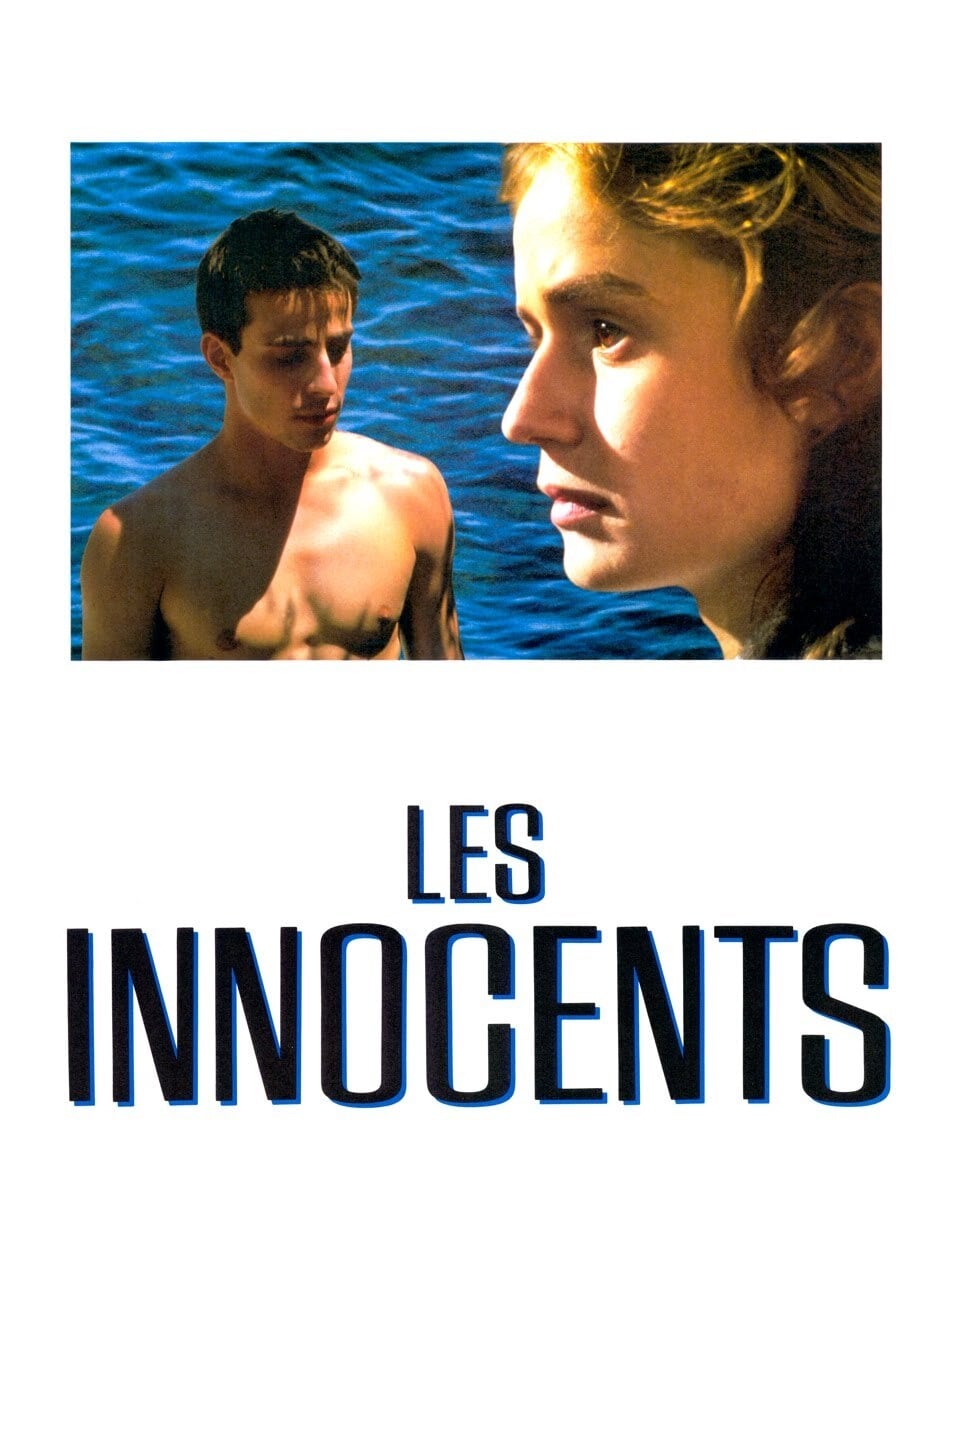 The Innocents (1987)